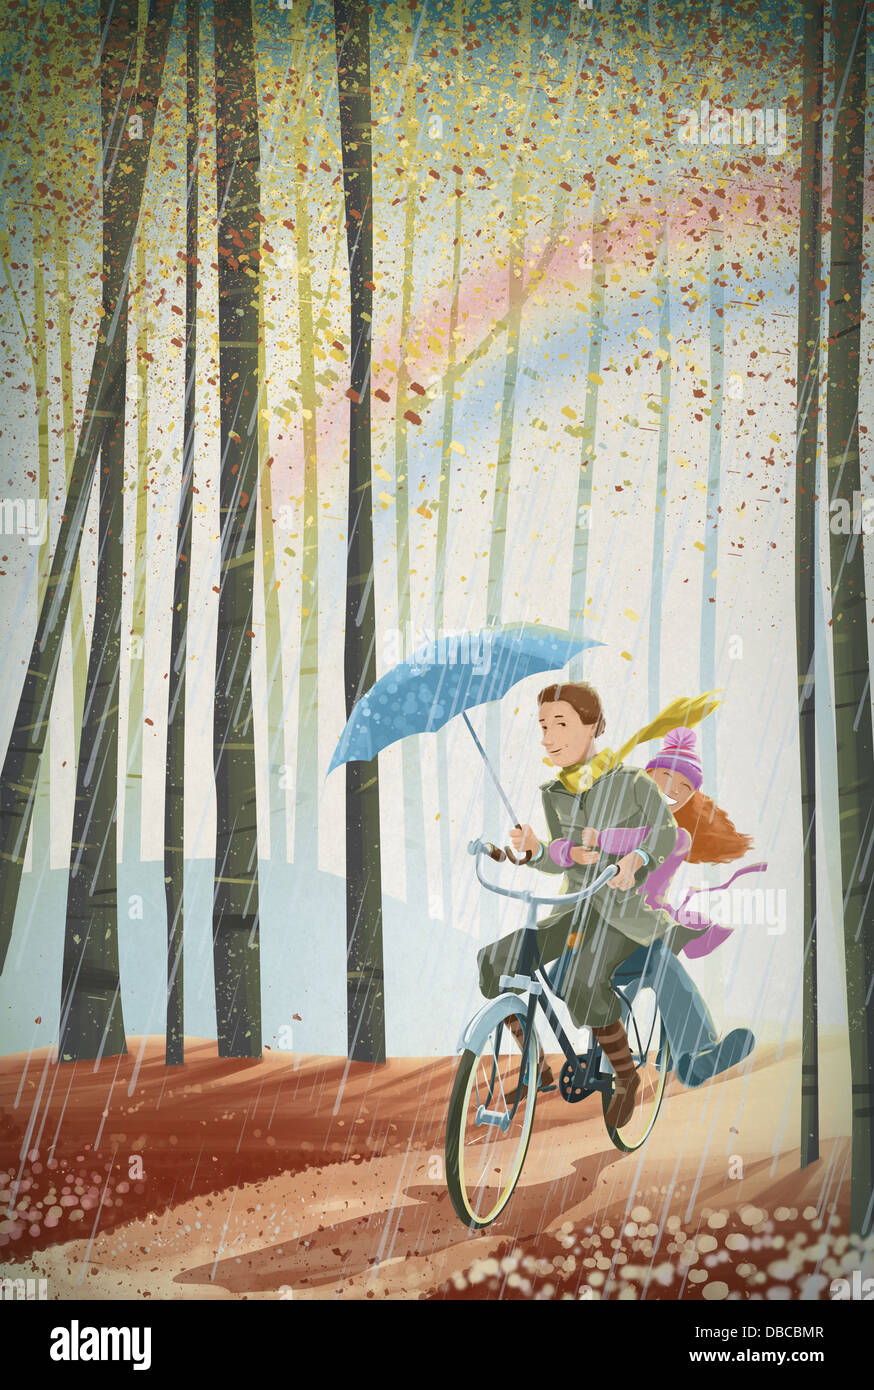 Illustration du couple riding bicycle in forest Banque D'Images